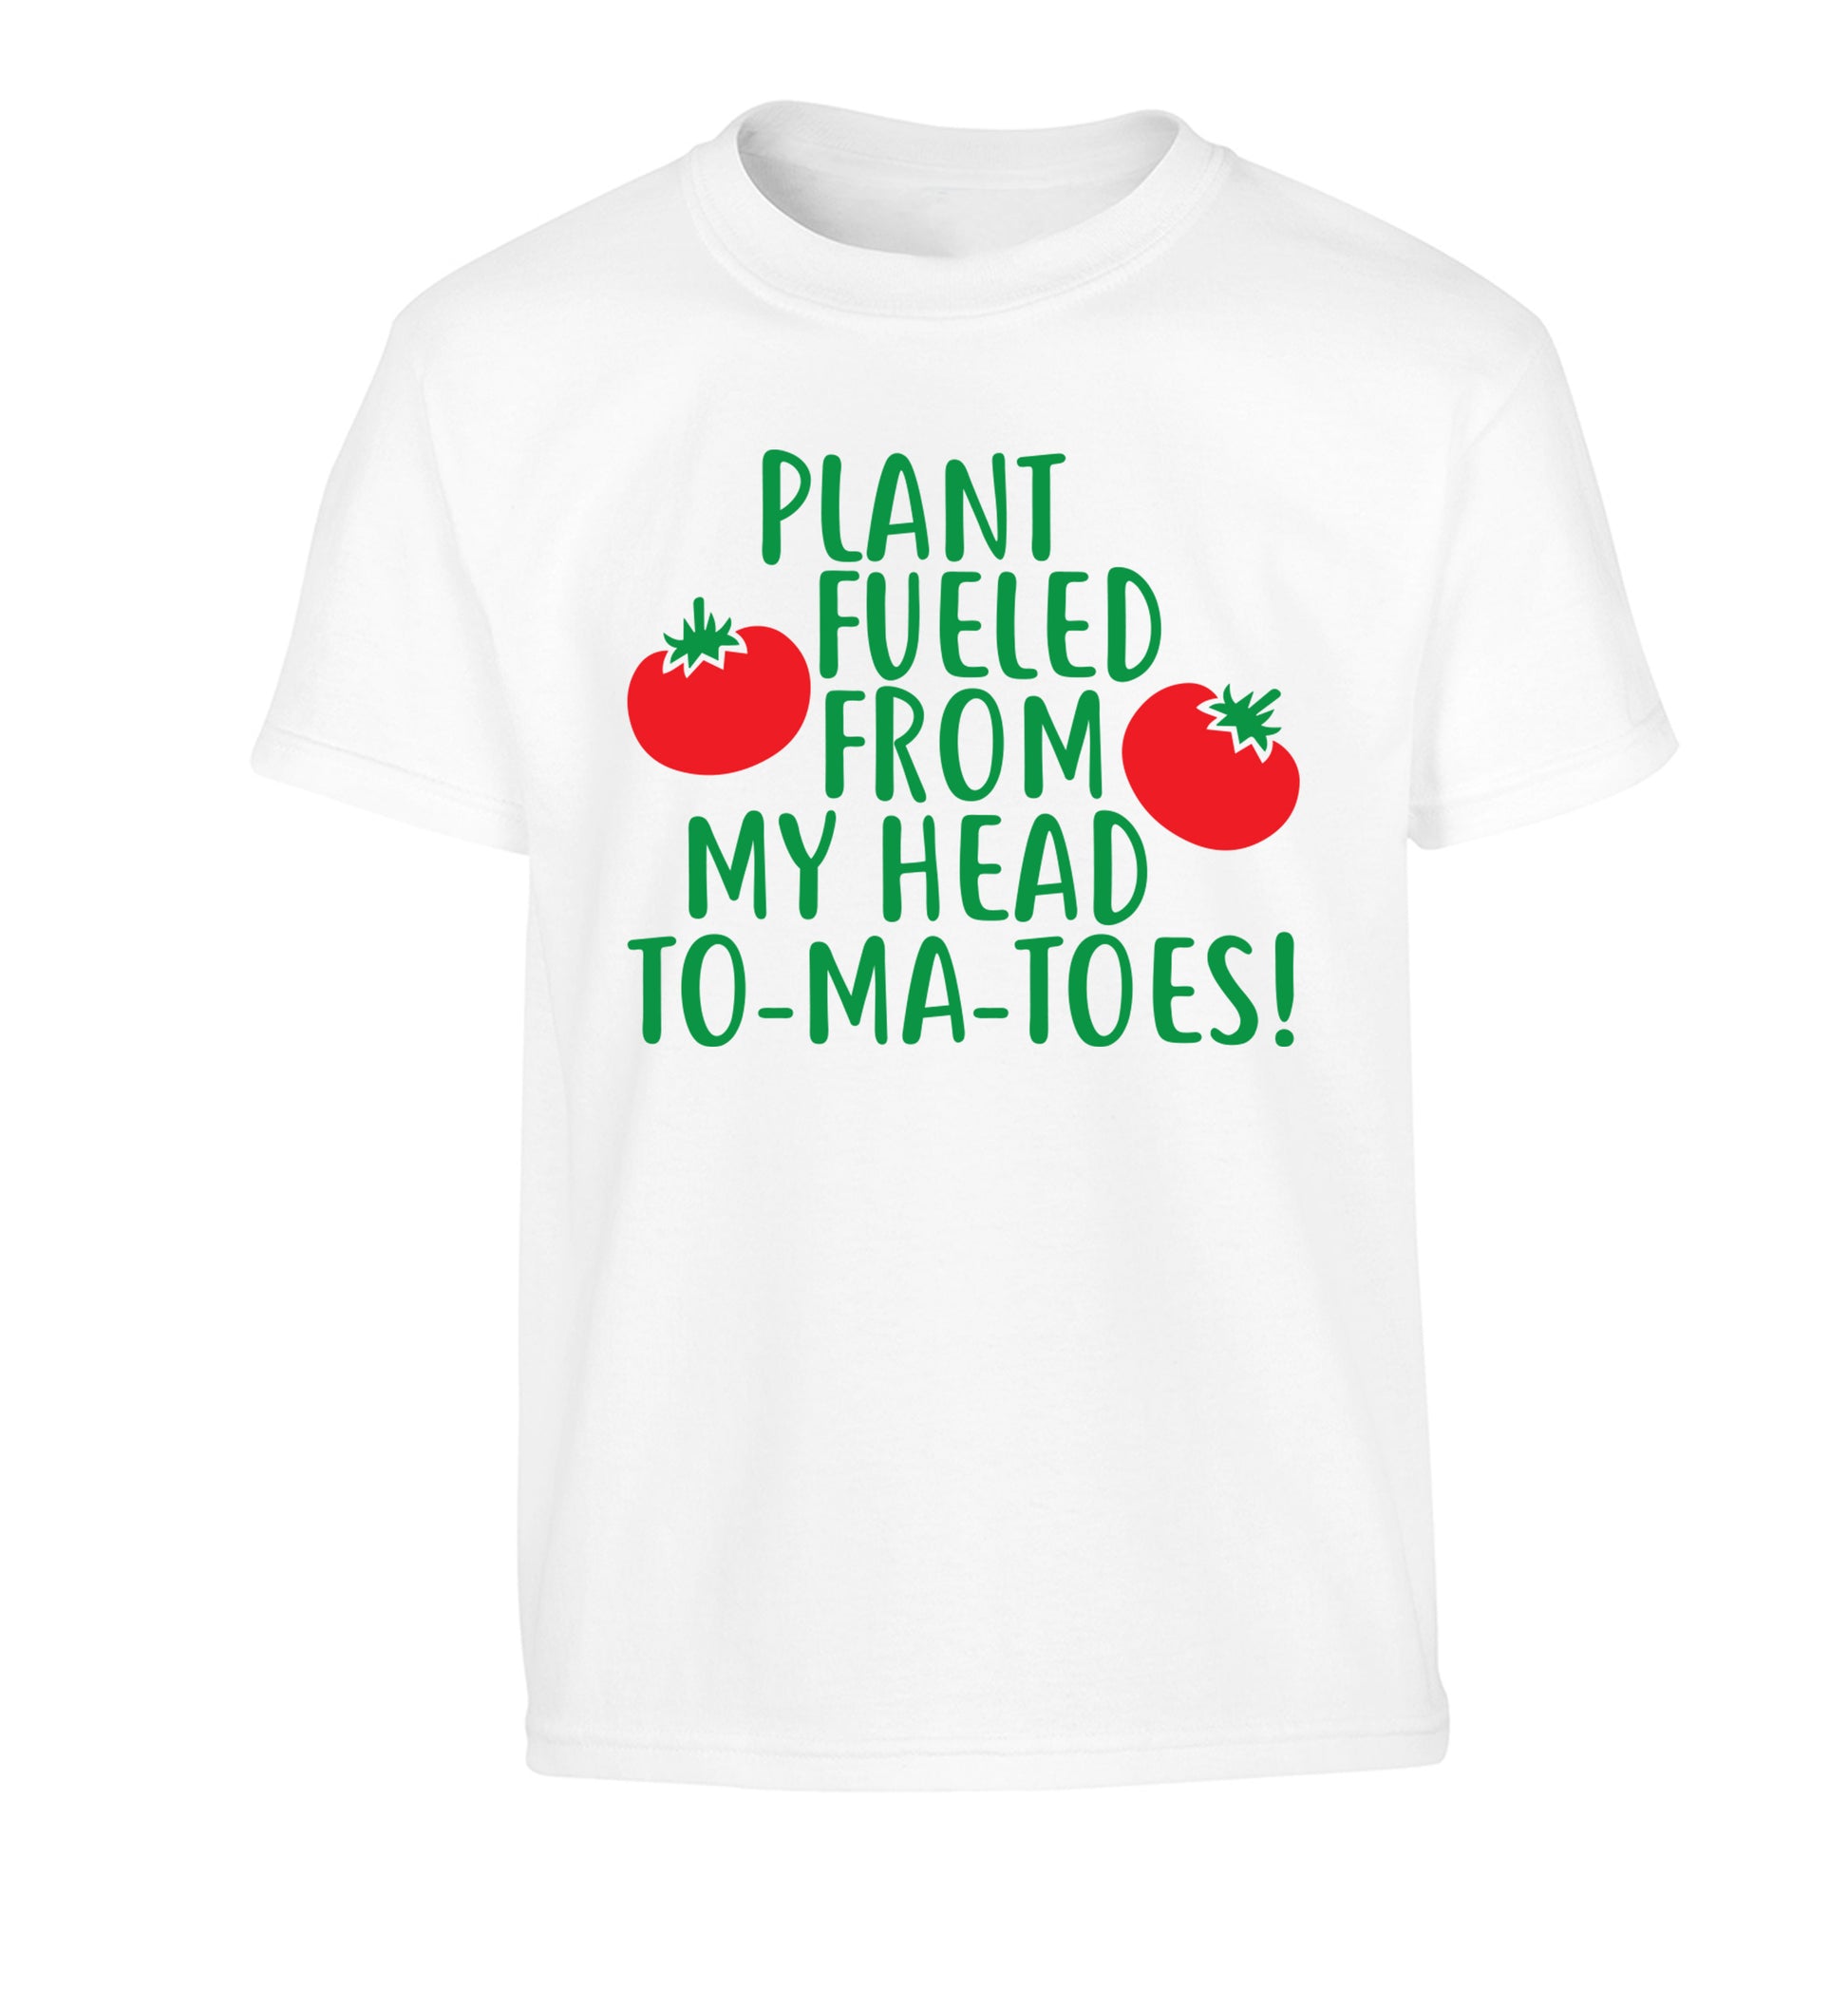 Plant fueled from my head to-ma-toes Children's white Tshirt 12-14 Years